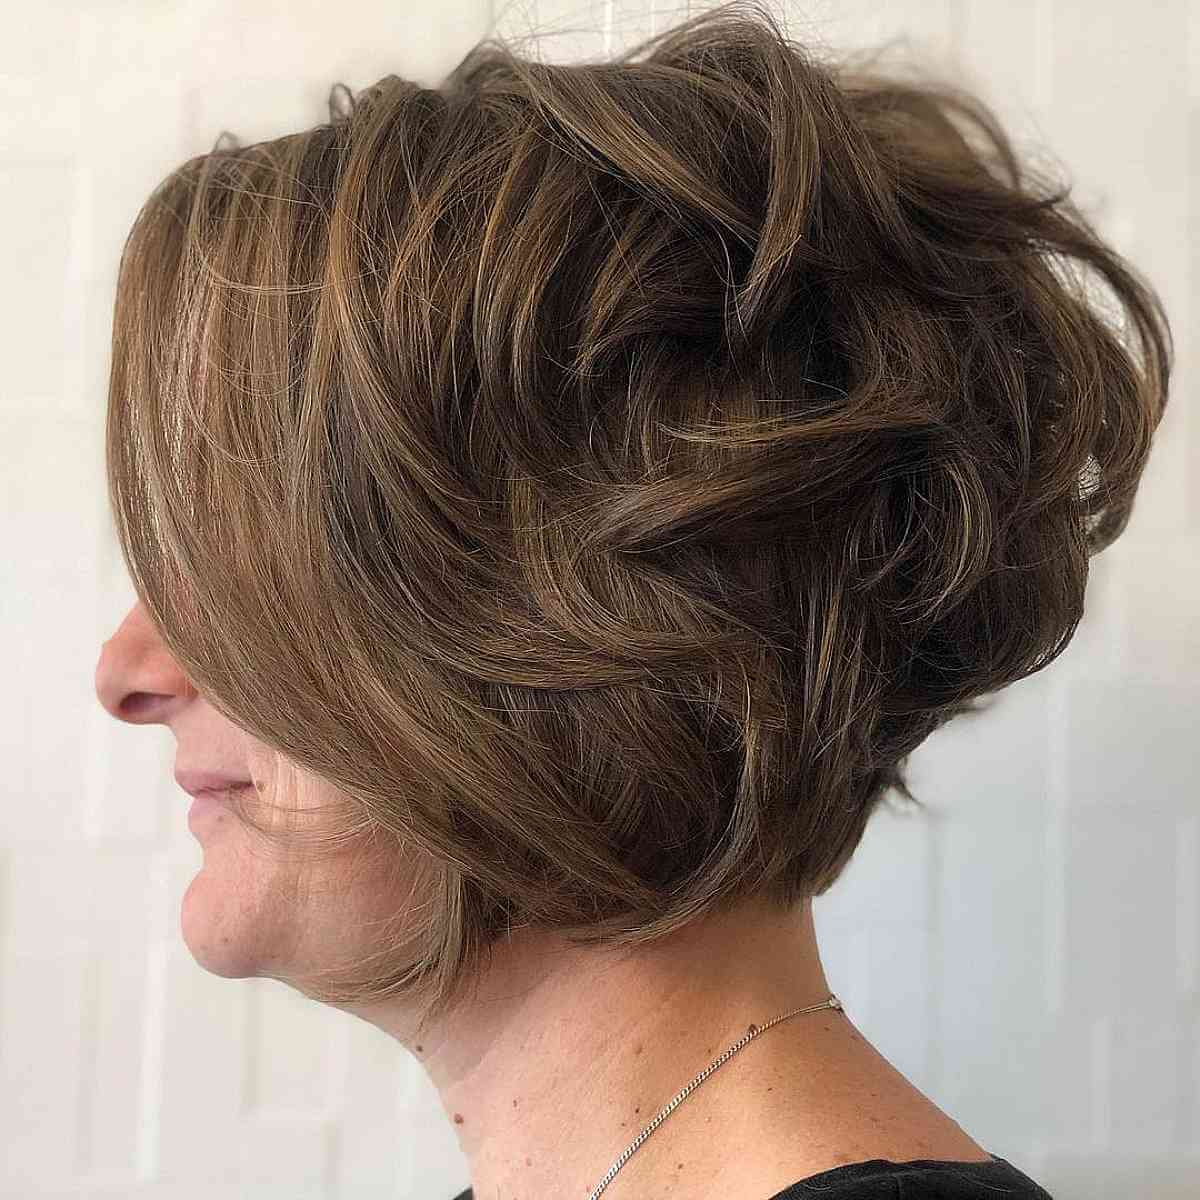 Graduated Bob with Short Layers for 40-Year-Olds